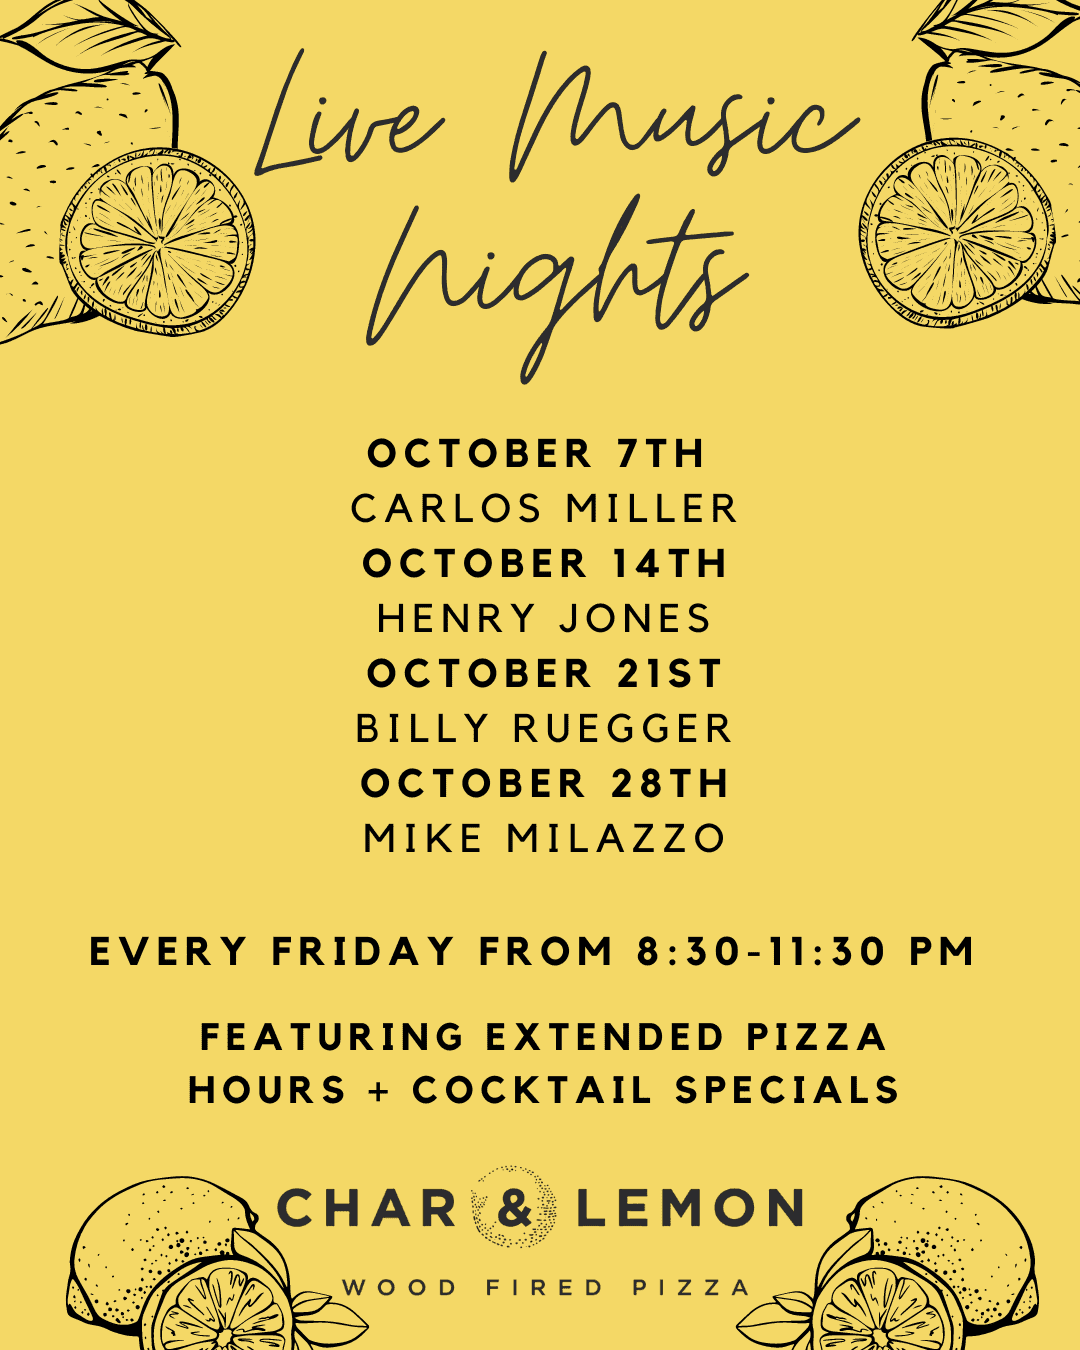 Don't miss out on our live music nights every Friday! We'll have extended pizza hours and cocktail specials kicking off at 8:30 PM. 